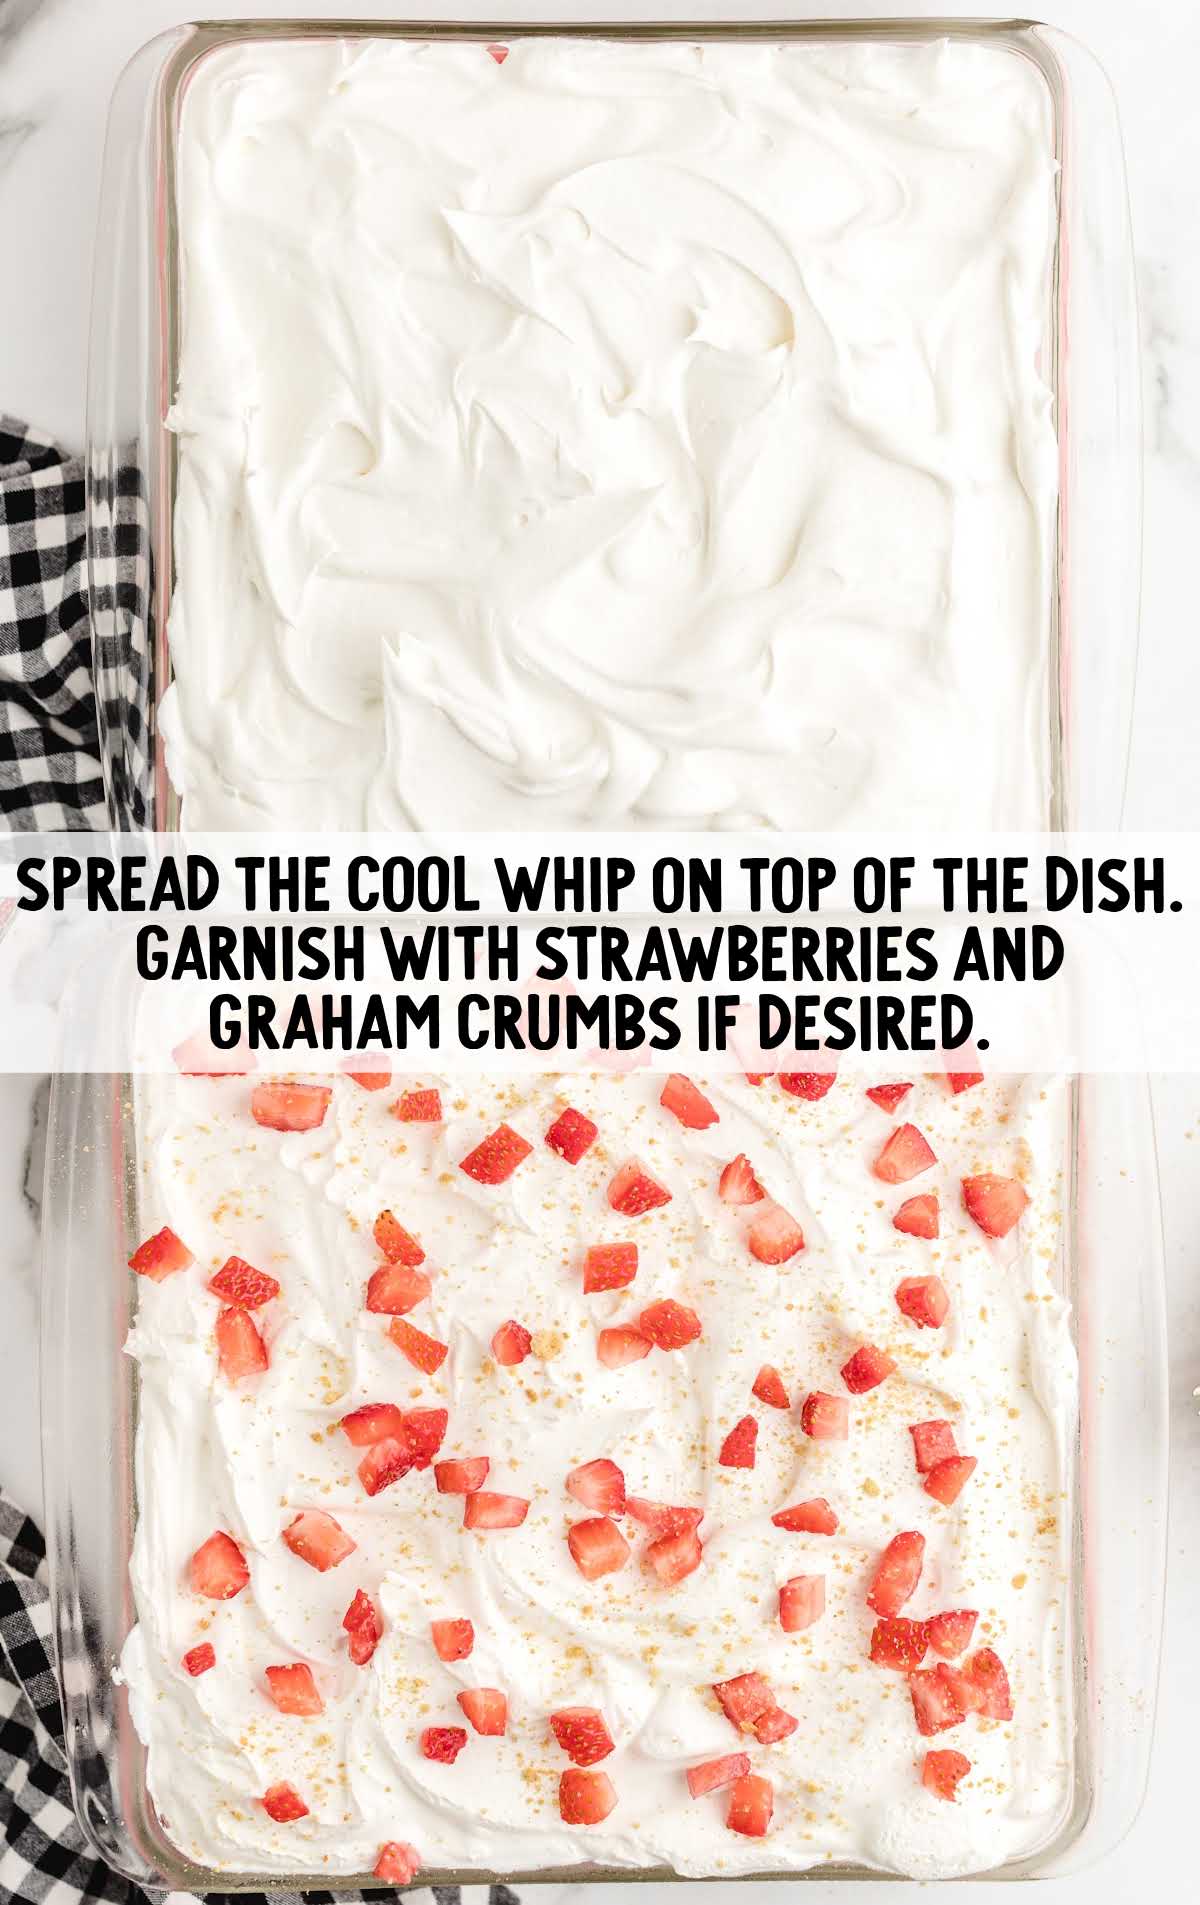 cool whip, sliced strawberries and graham crackers spread on top of the cake in a baking dish